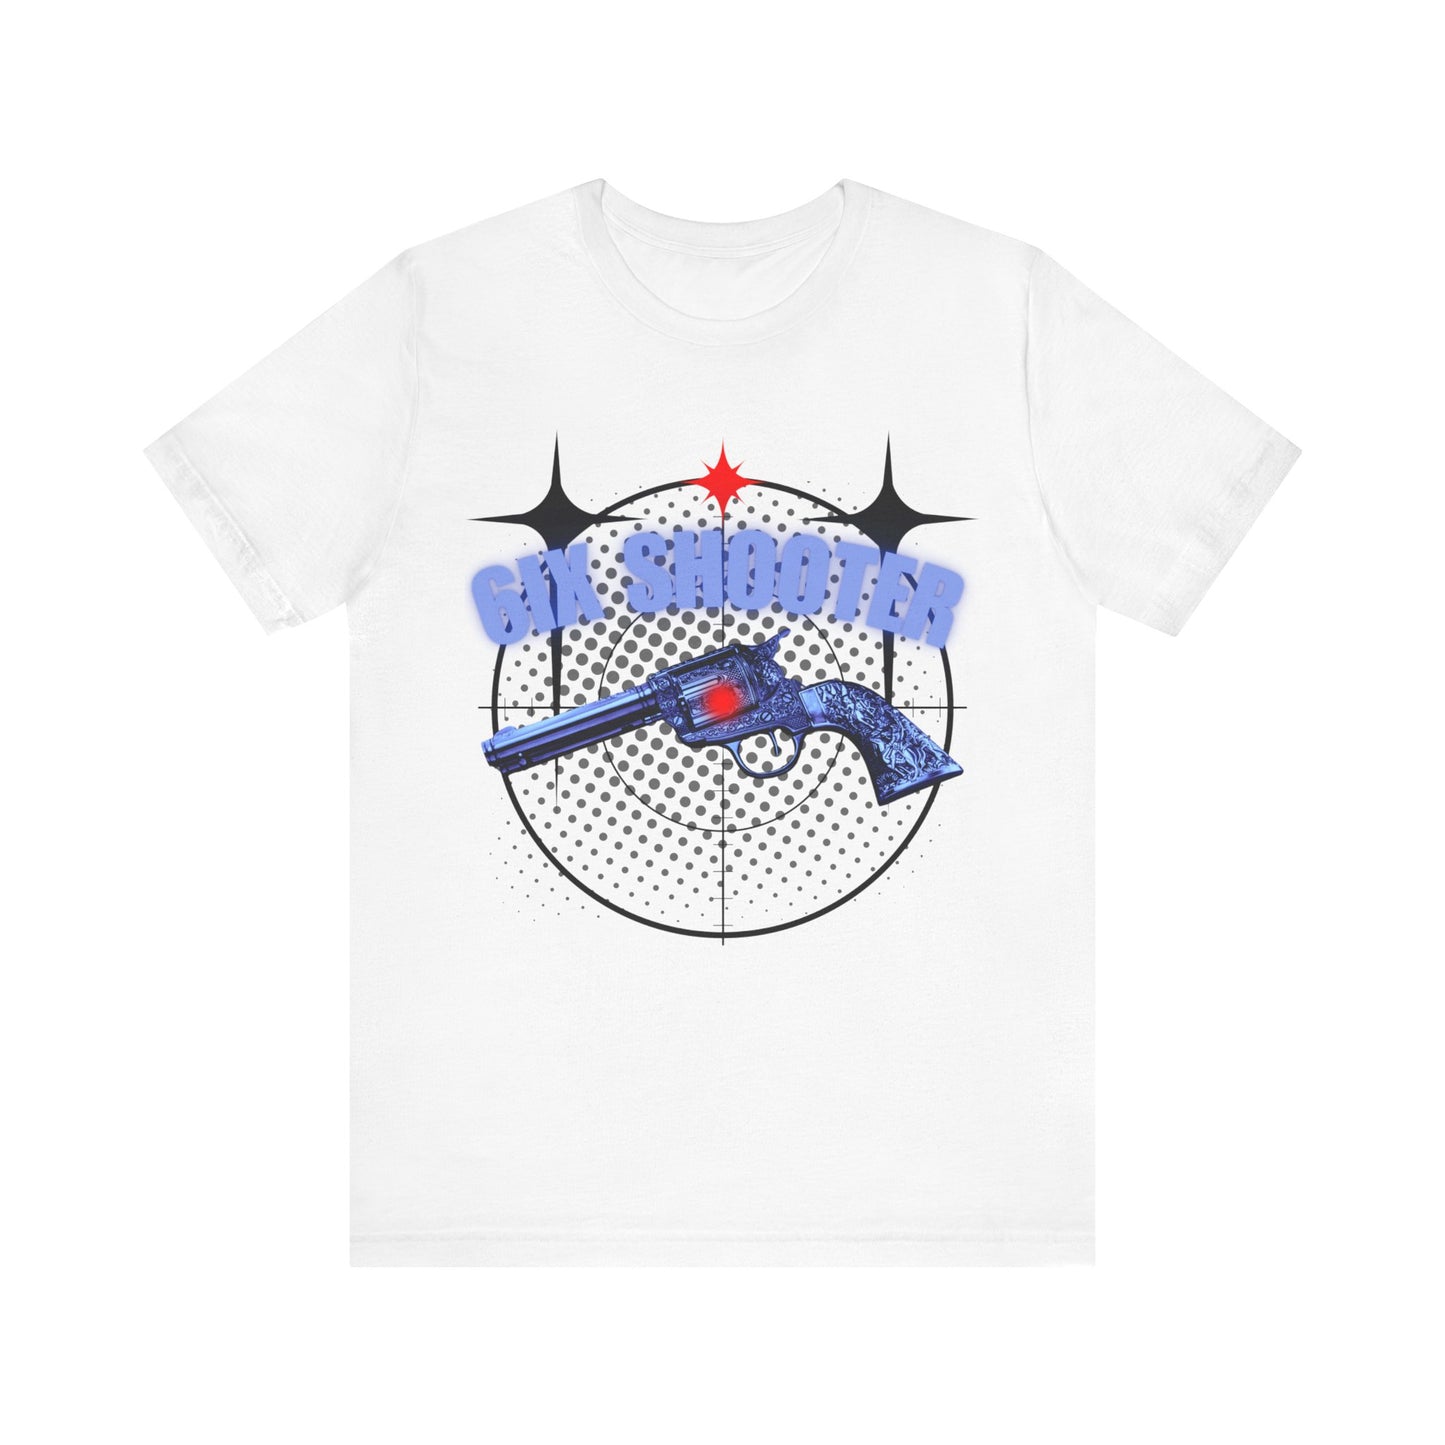 "6IX SHOOTER" Graphic T-Shirt (Design on front)